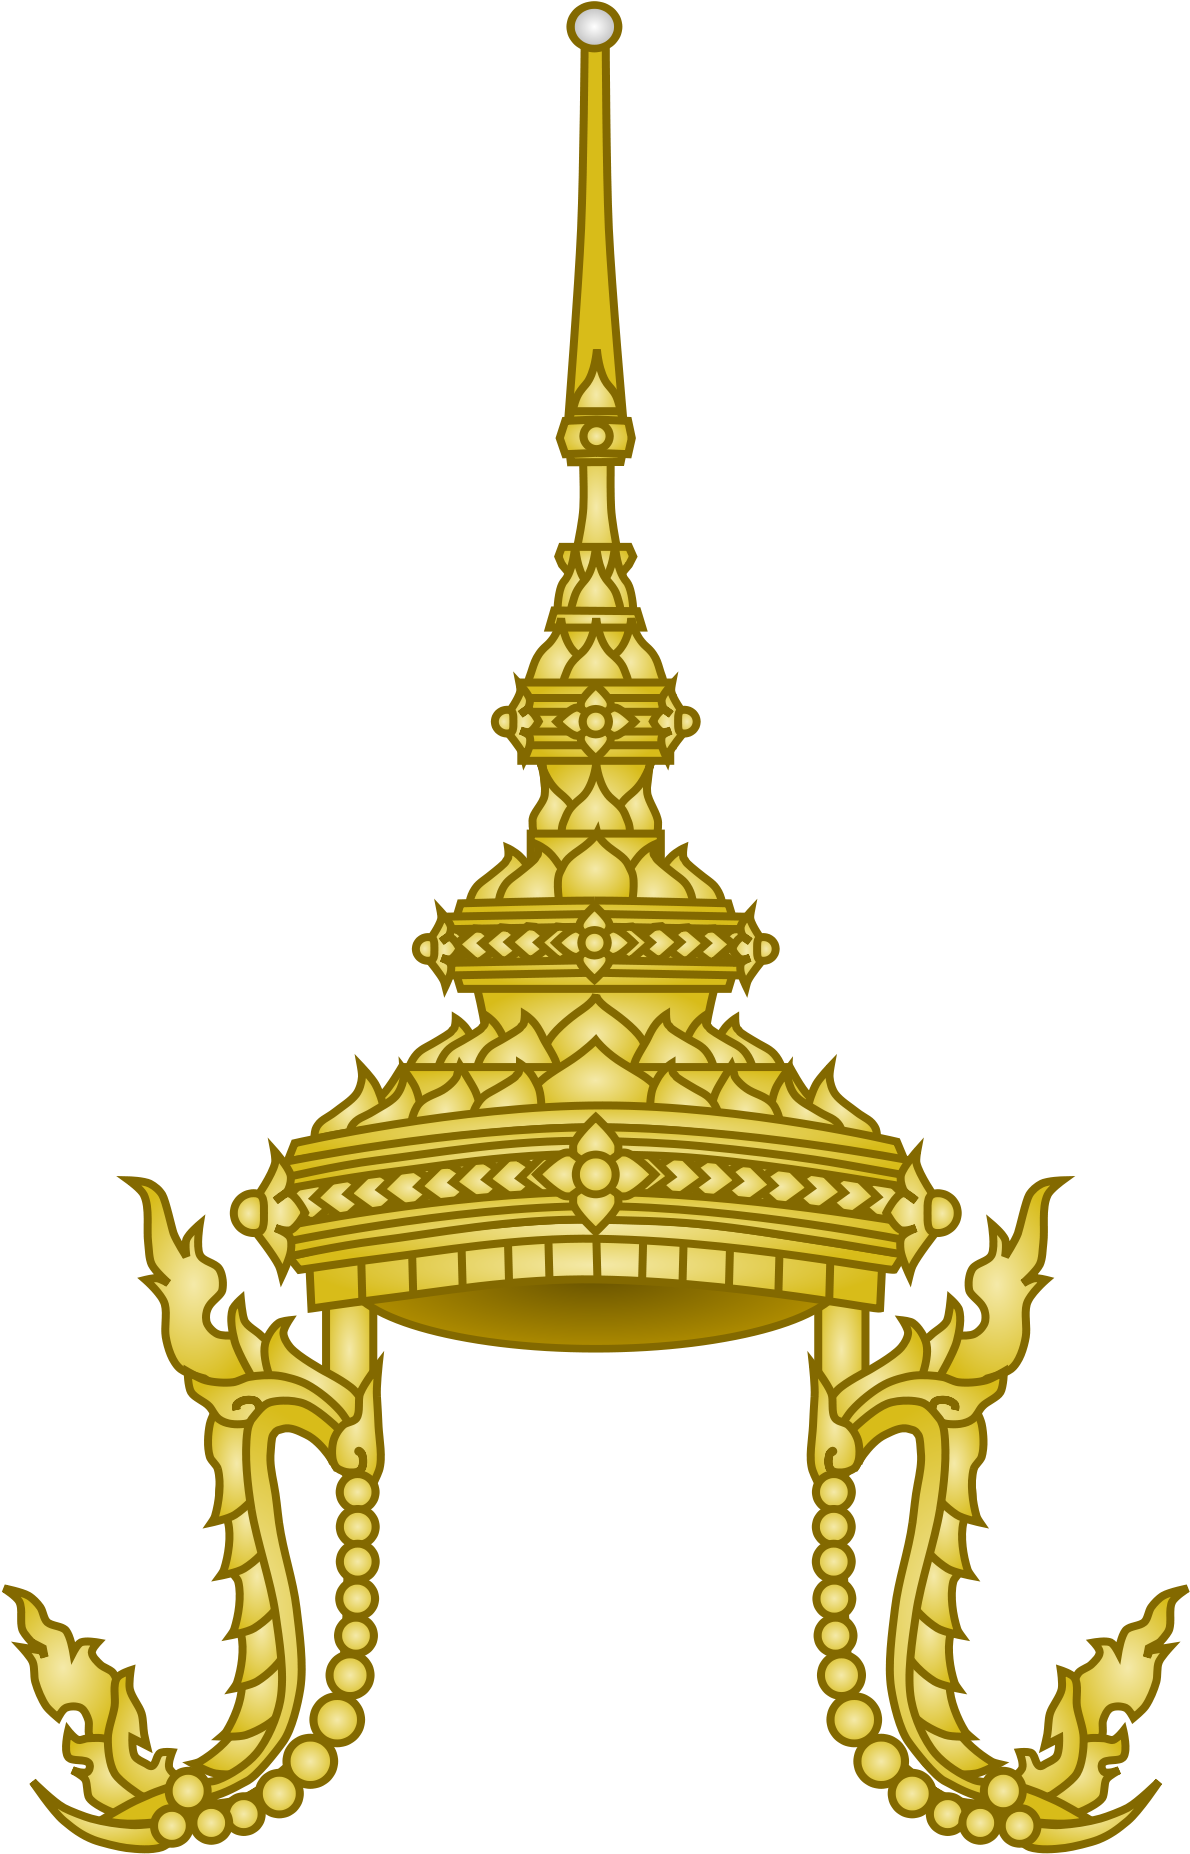 A Gold Ornate Structure With A Black Background